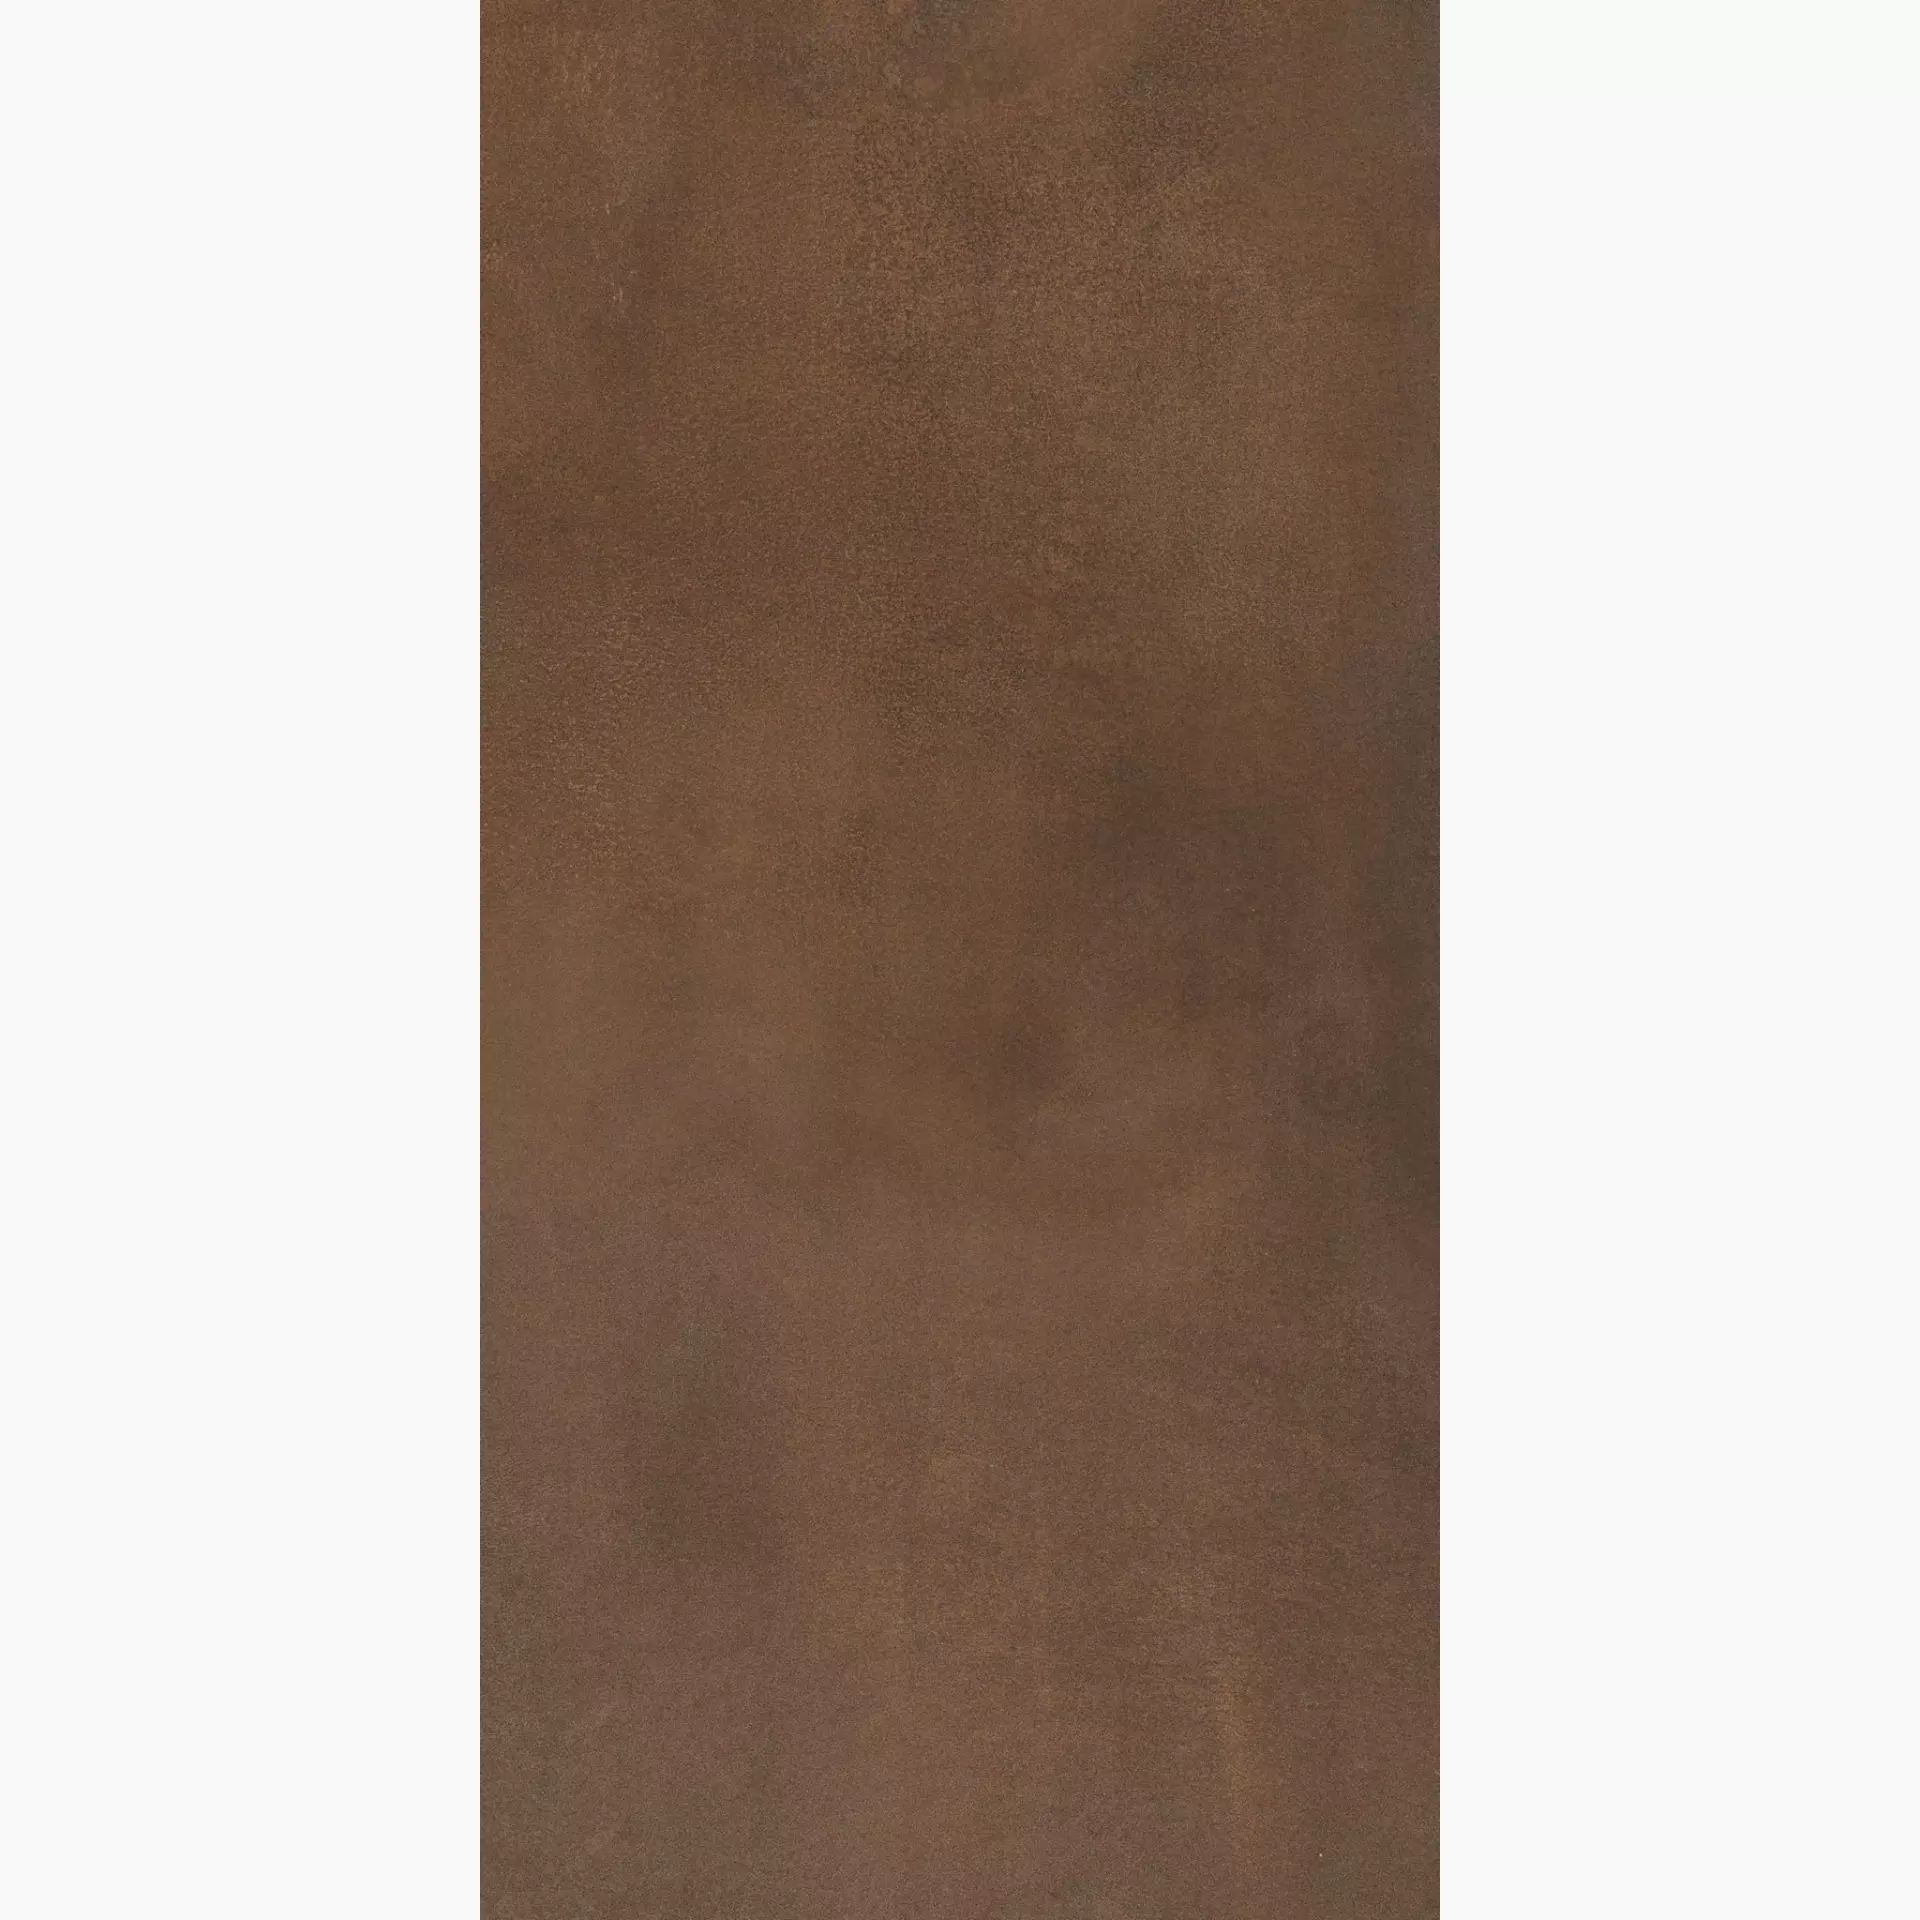 ABK Interno9 Rust Naturale I9R03300 30x60cm rectified 8,5mm